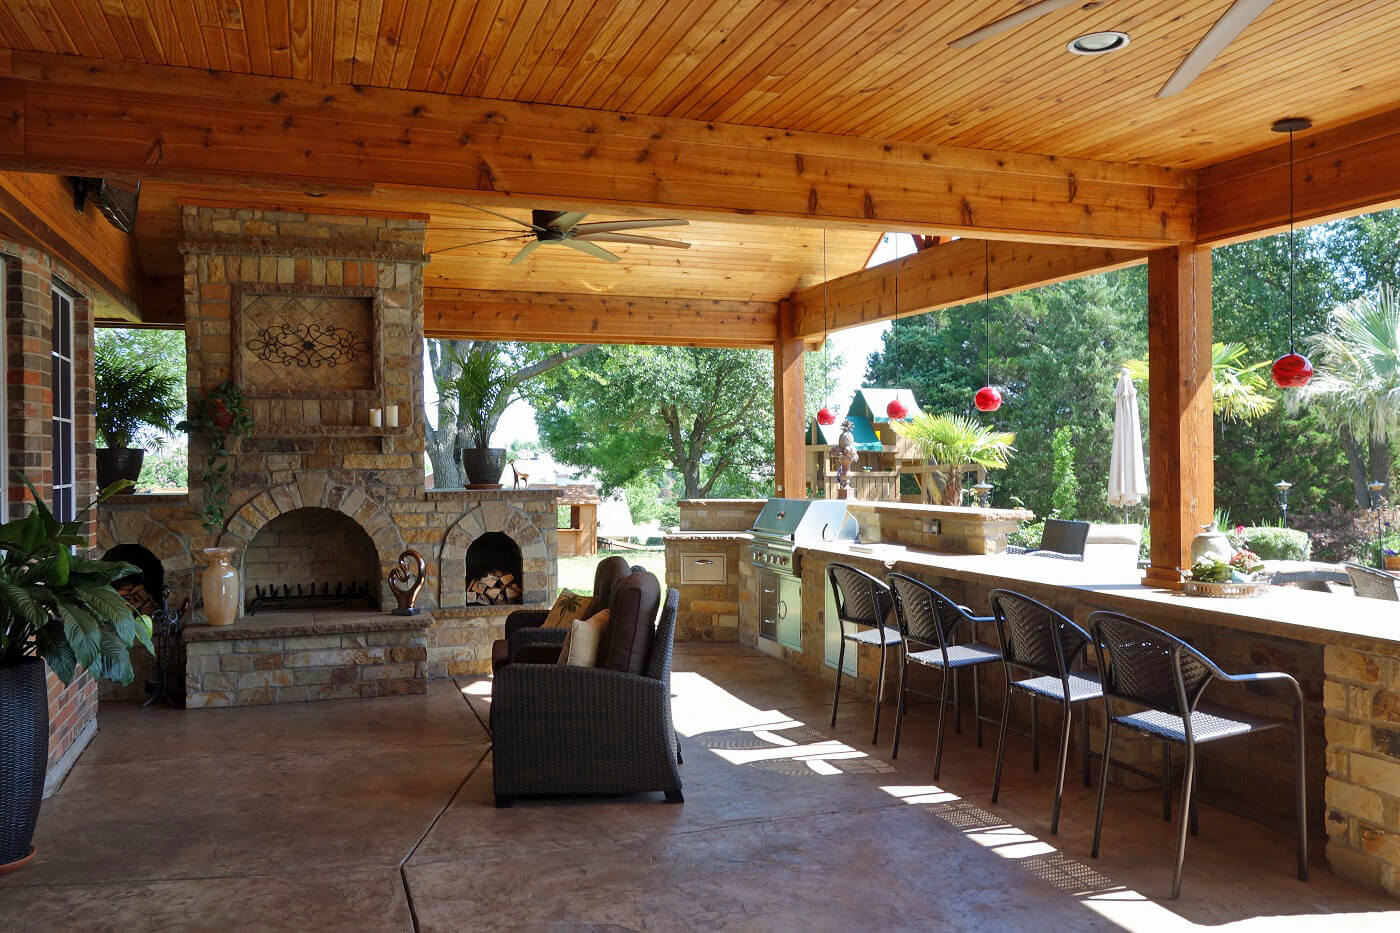 Custom covered patio with bar counter and outdoor fireplace